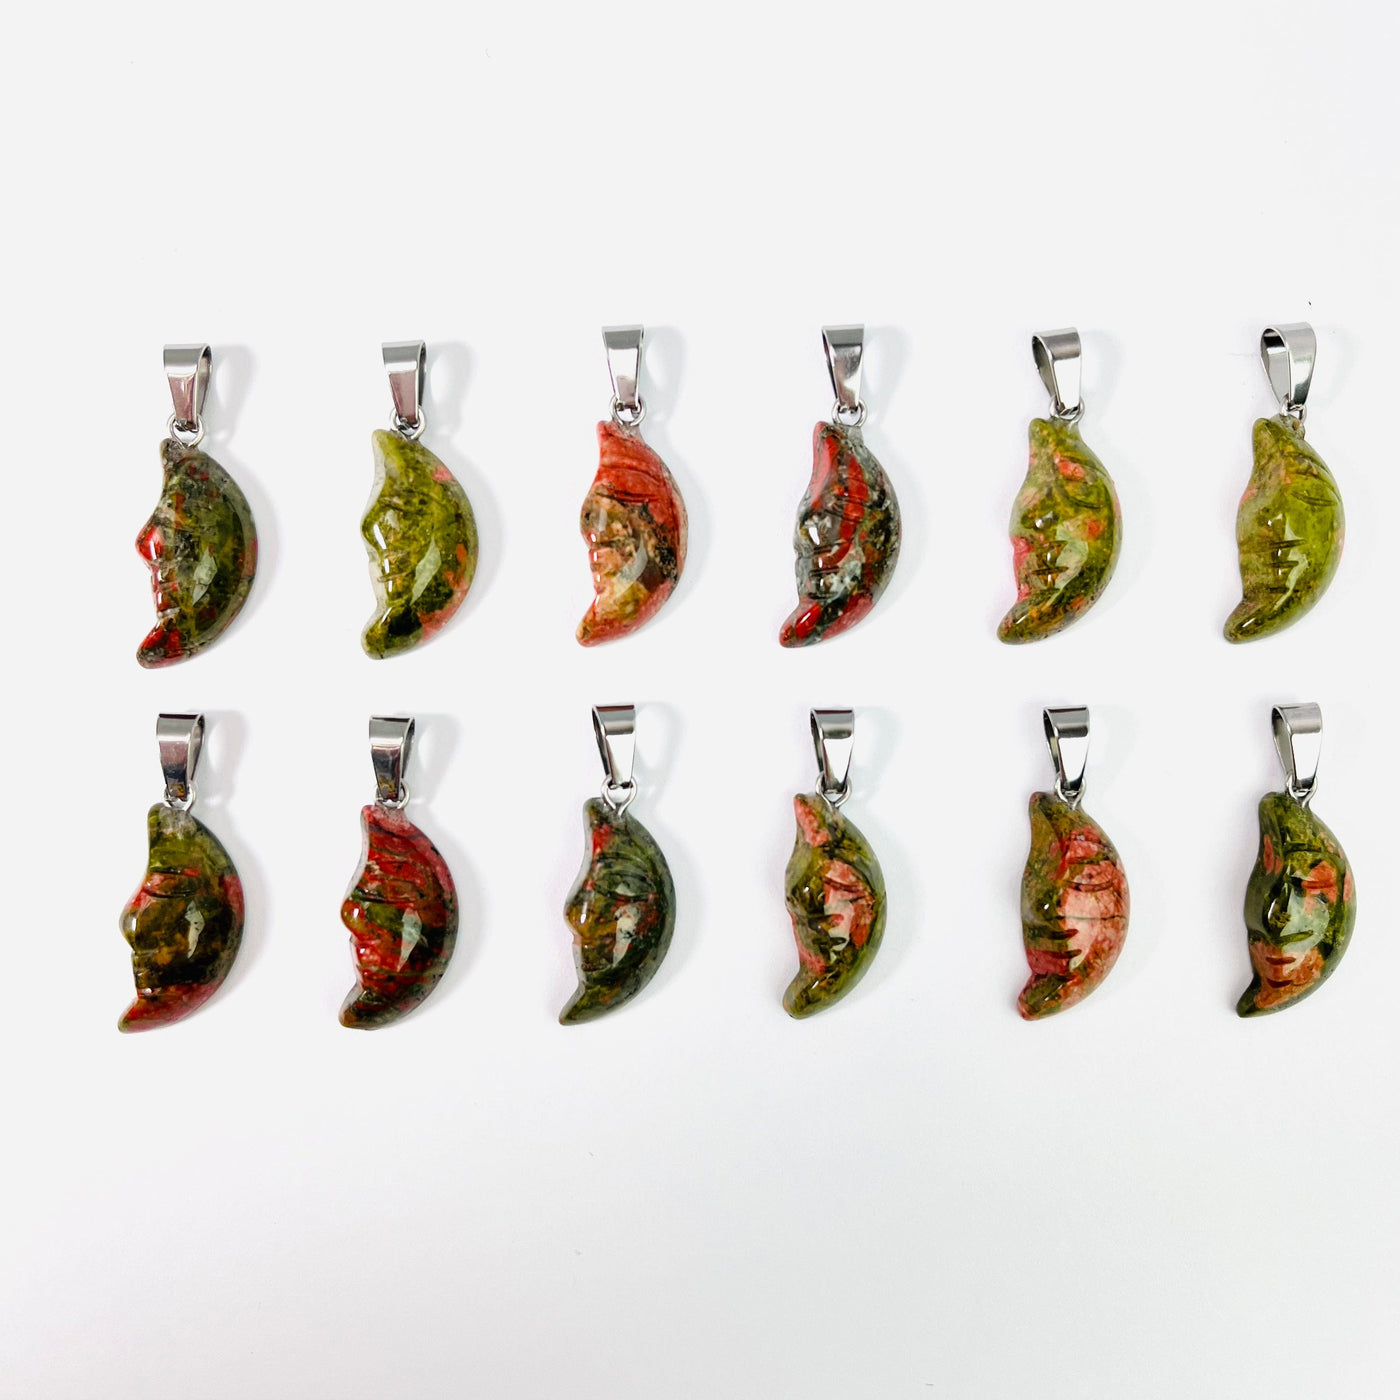 Twelve Unakite Crescent Moon Gemstones Pendants lined up in two rows on a white surface.